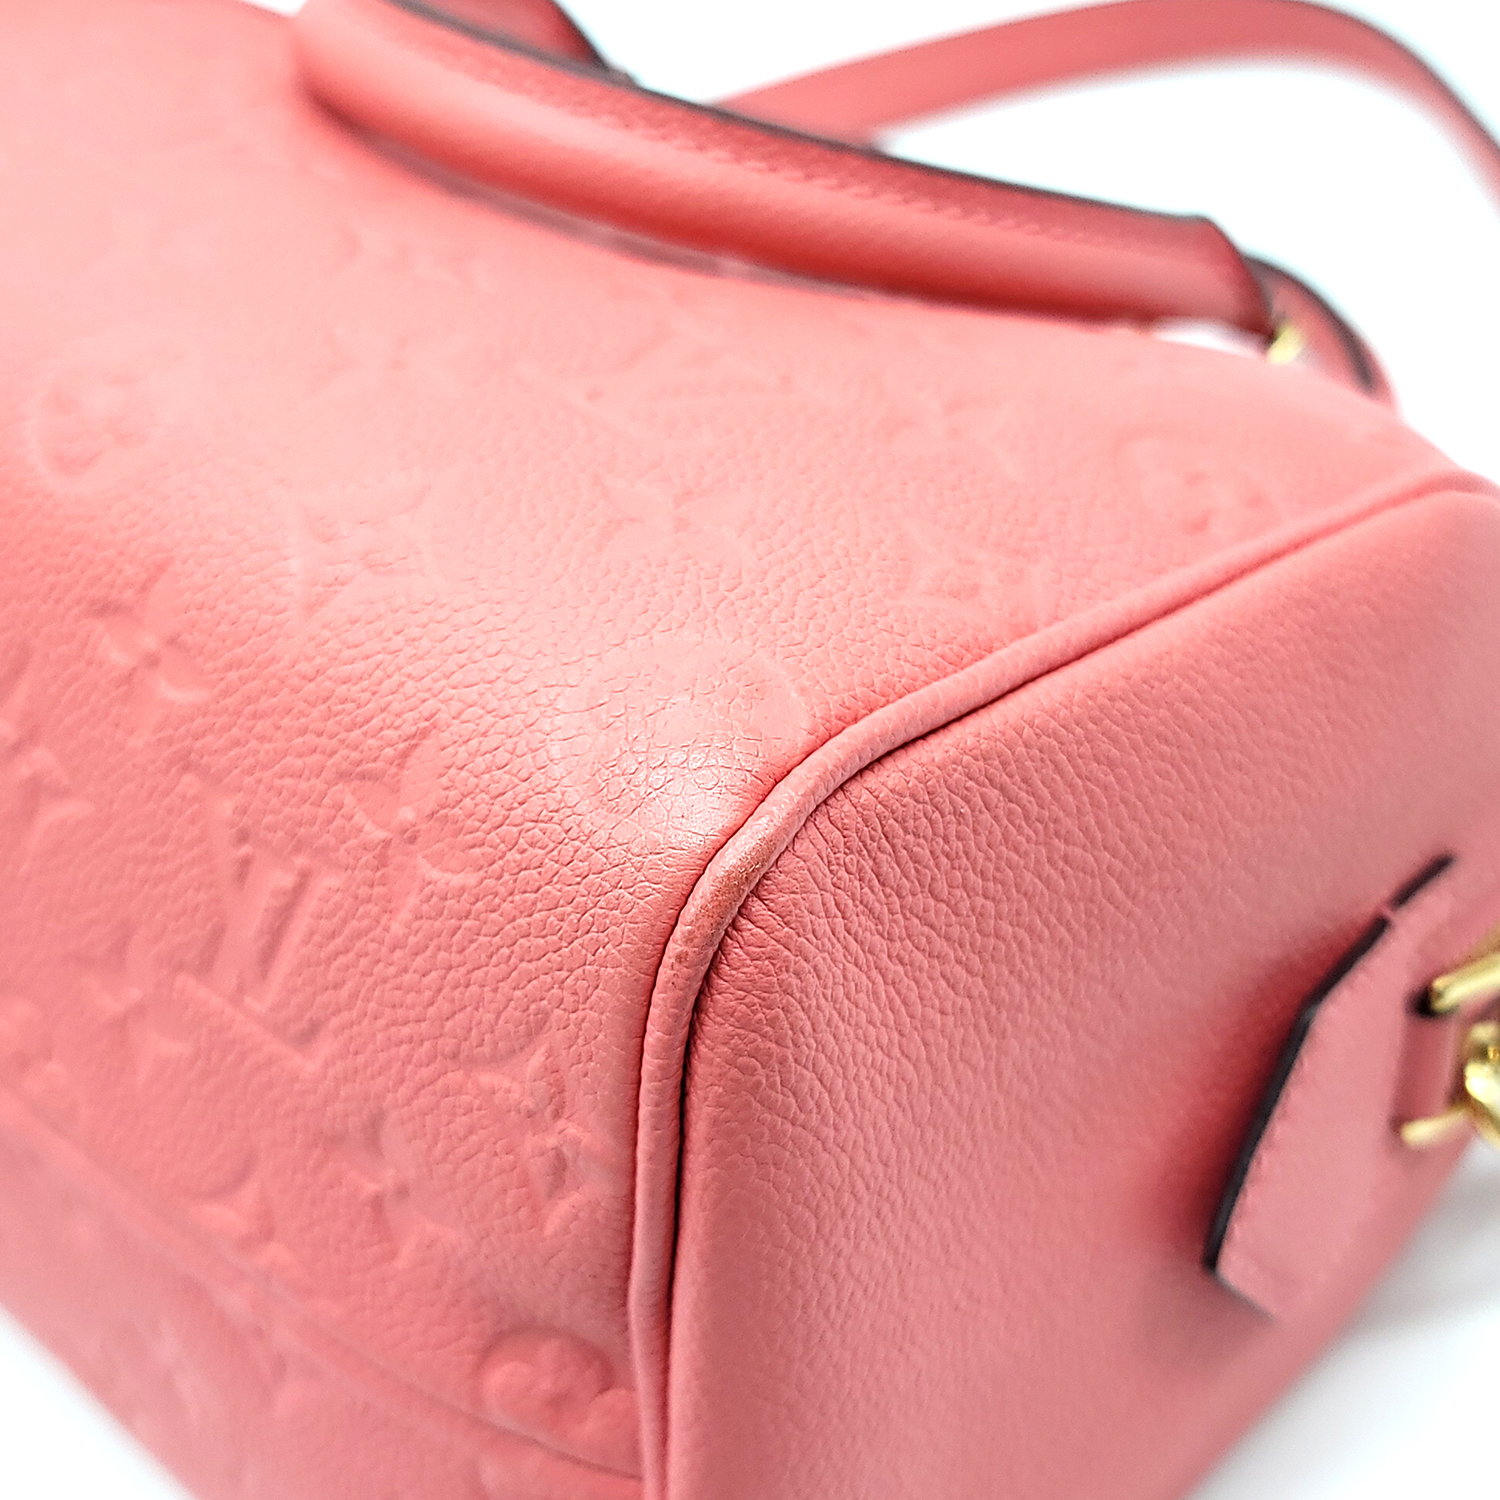 Louis Vuitton Speedy Bandouliere Monogram Empreinte 25 Rose Poudre in  Leather with Gold-tone - GB